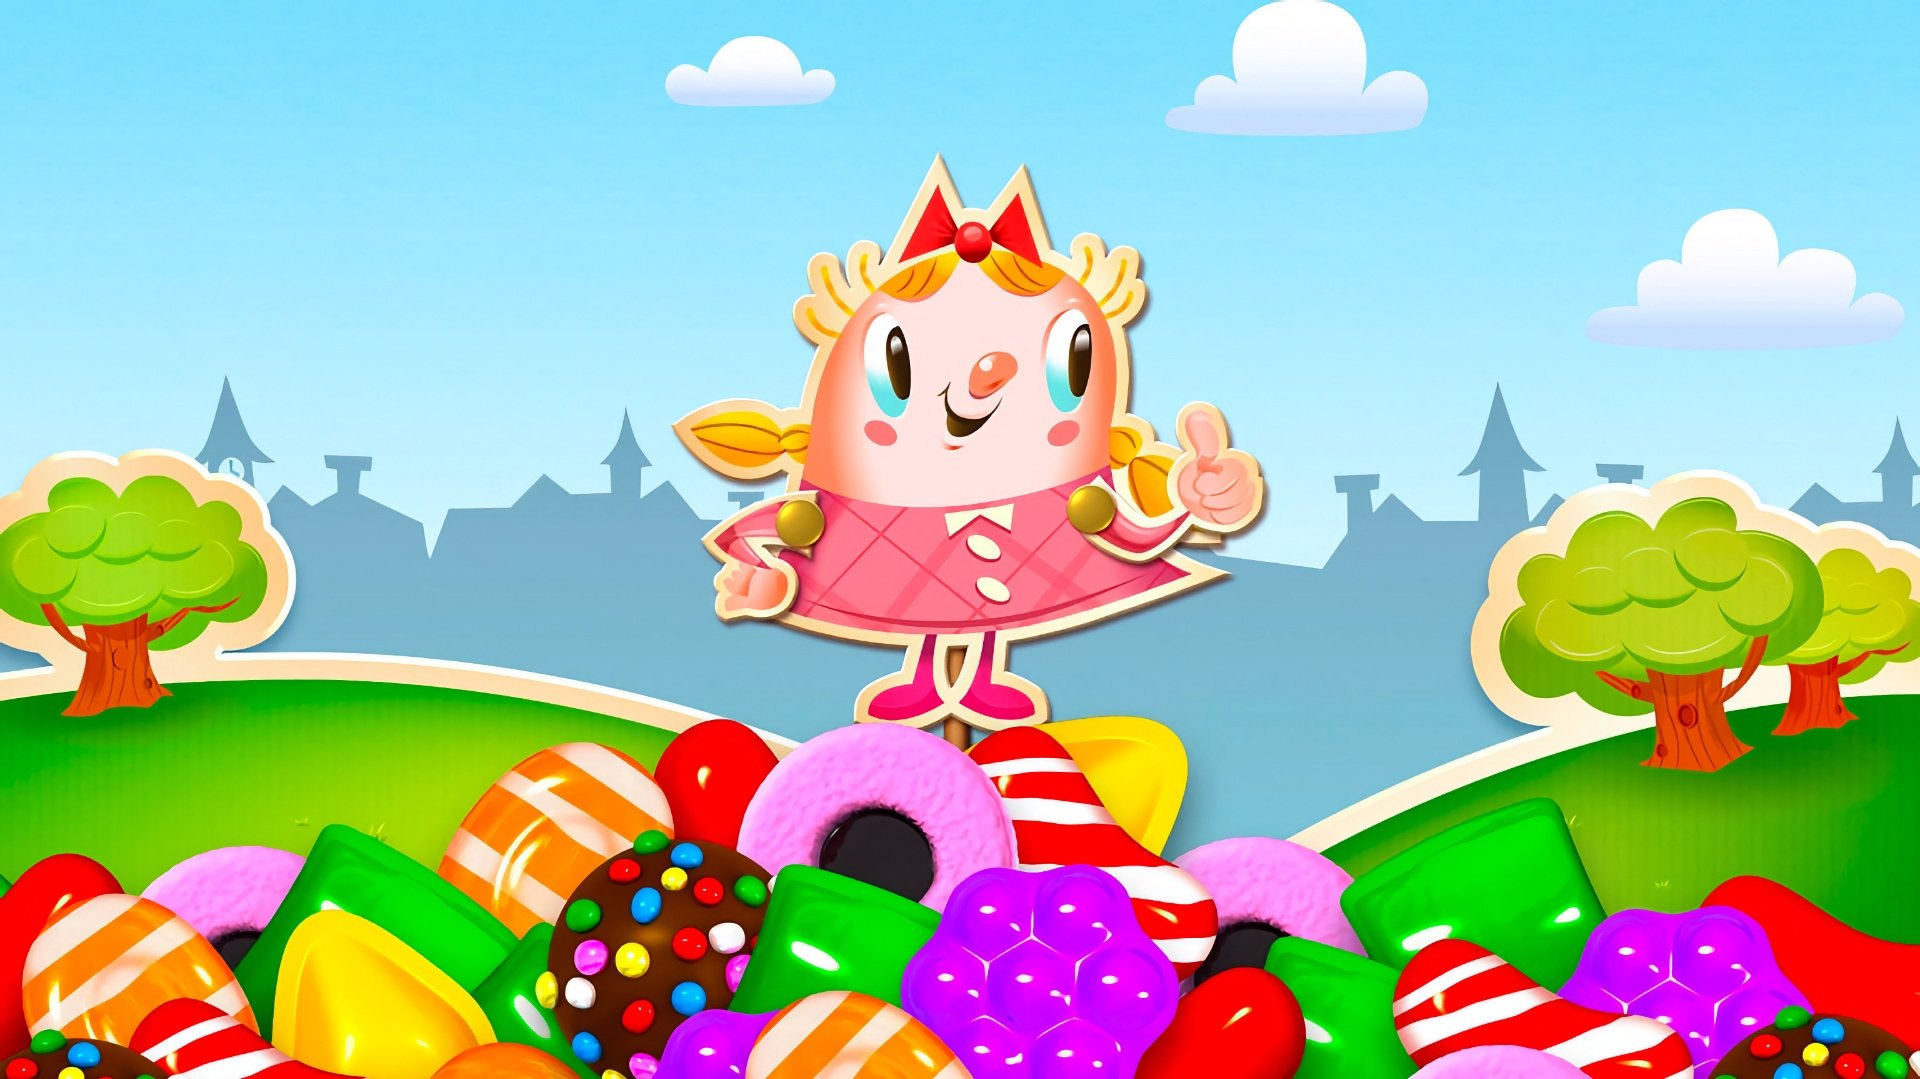 Sensor Tower: Candy Crush players spent an average of $4.2 million